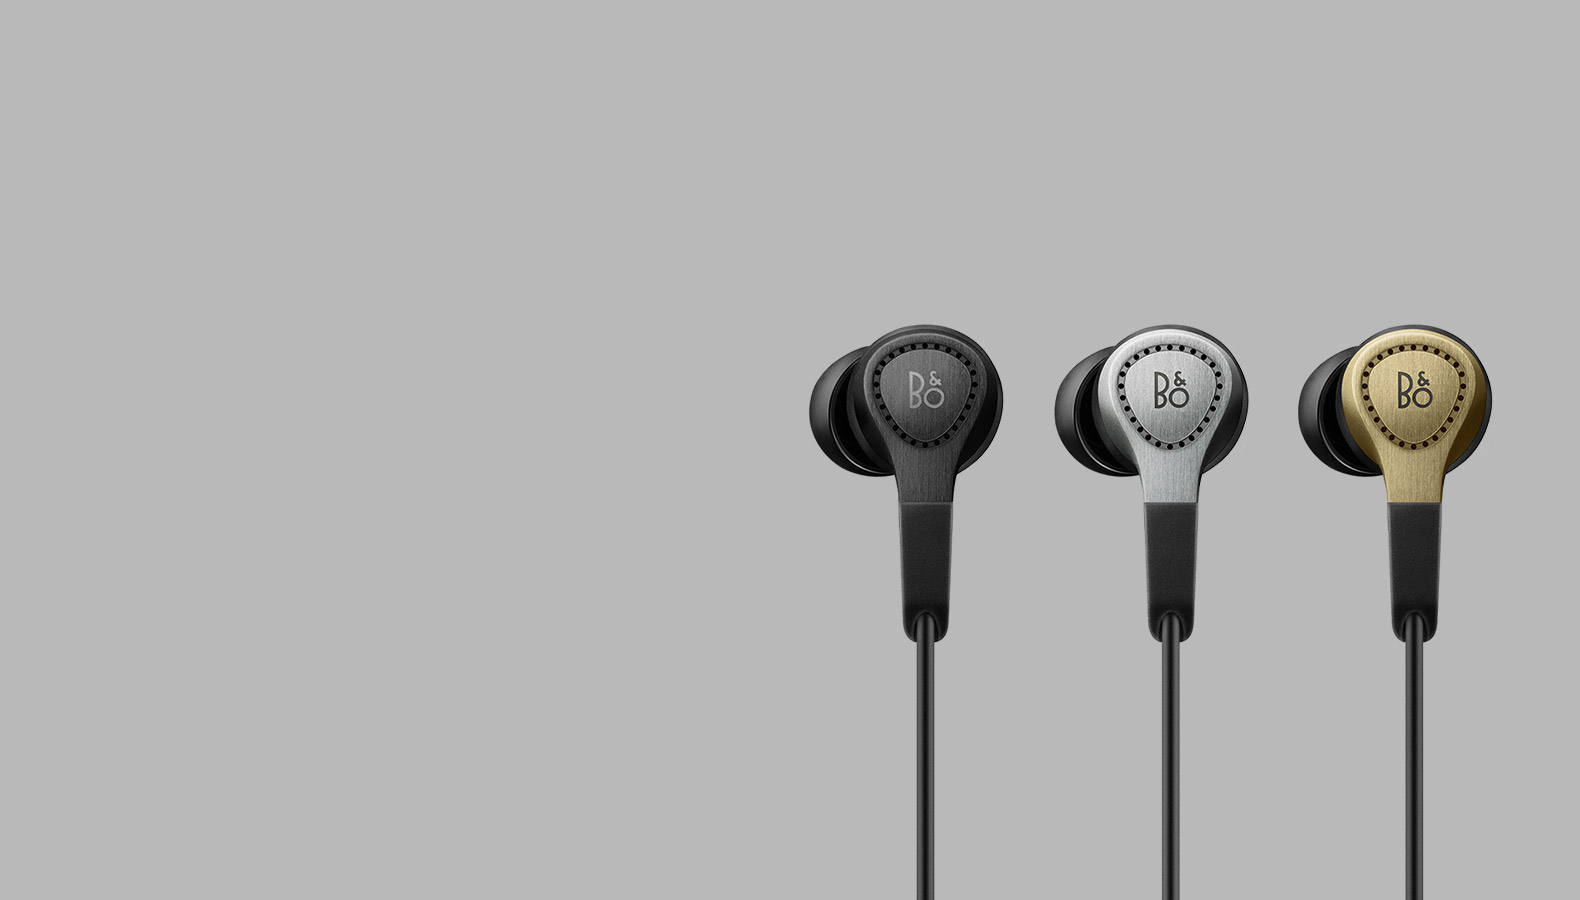 Beoplay H3